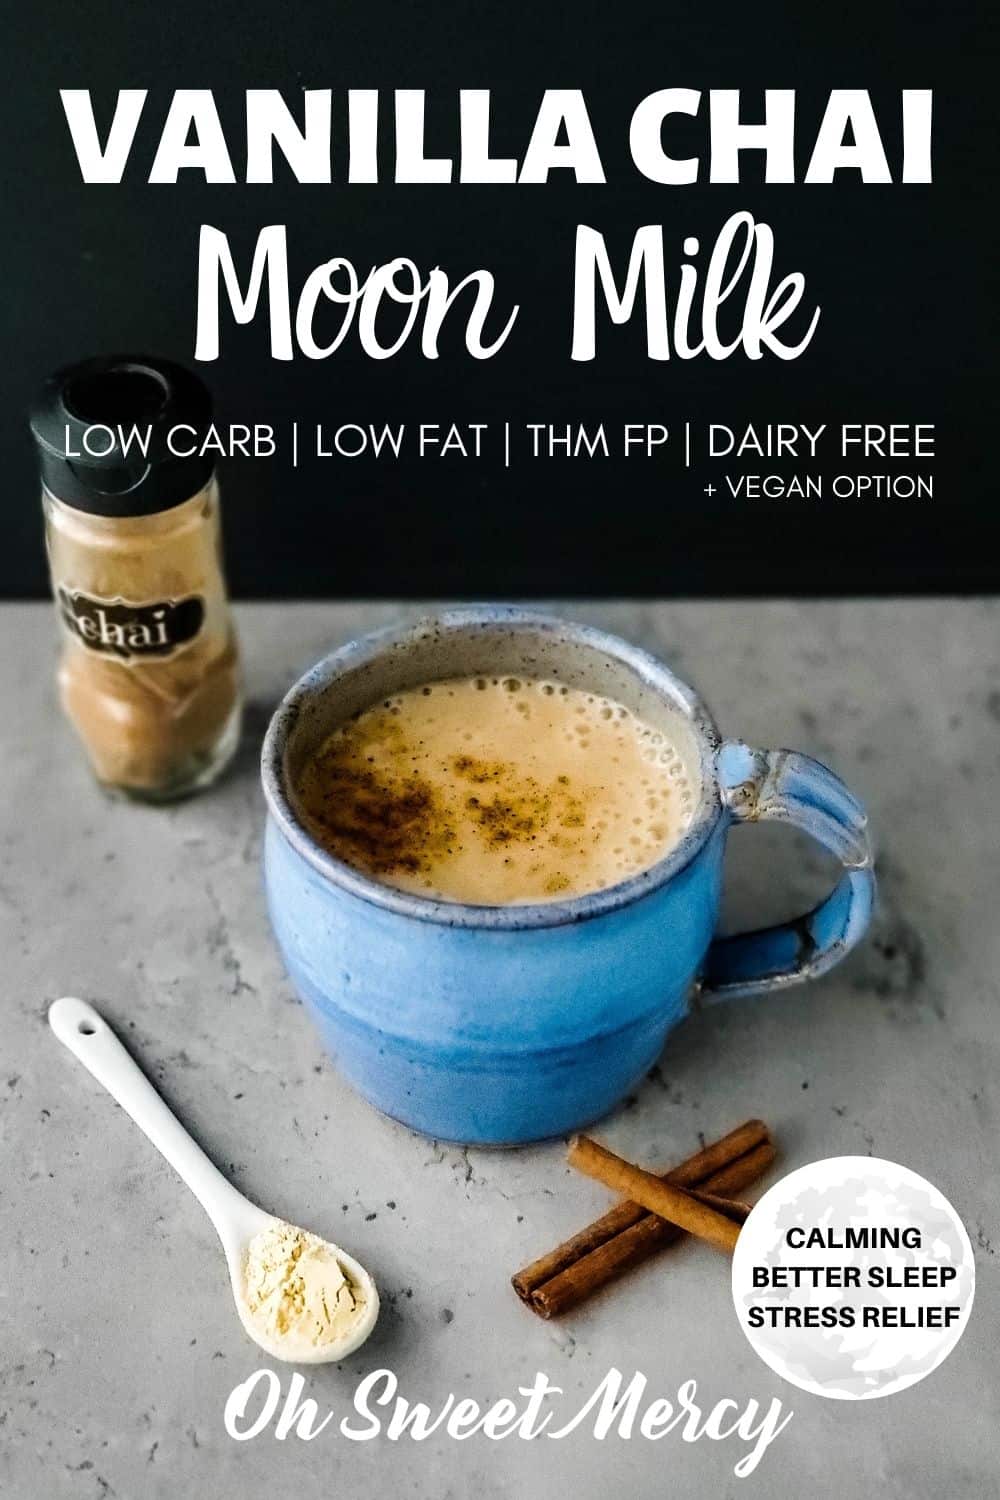 Sip on a mug of my Vanilla Chai Moon Milk before bed for a better night's sleep. It's calming and helps the body fight the effects of stress, including reducing cortisol levels that pack on the belly fat. My easy recipe takes 10 minutes or less to prepare, is a #lowcarb #lowfat and #sugarfree #thm #fuelpull beverage perfect to sip on before bed. #dairyfree with #vegan option, too. #ashwagandha #moonmilk @ohsweetmercy